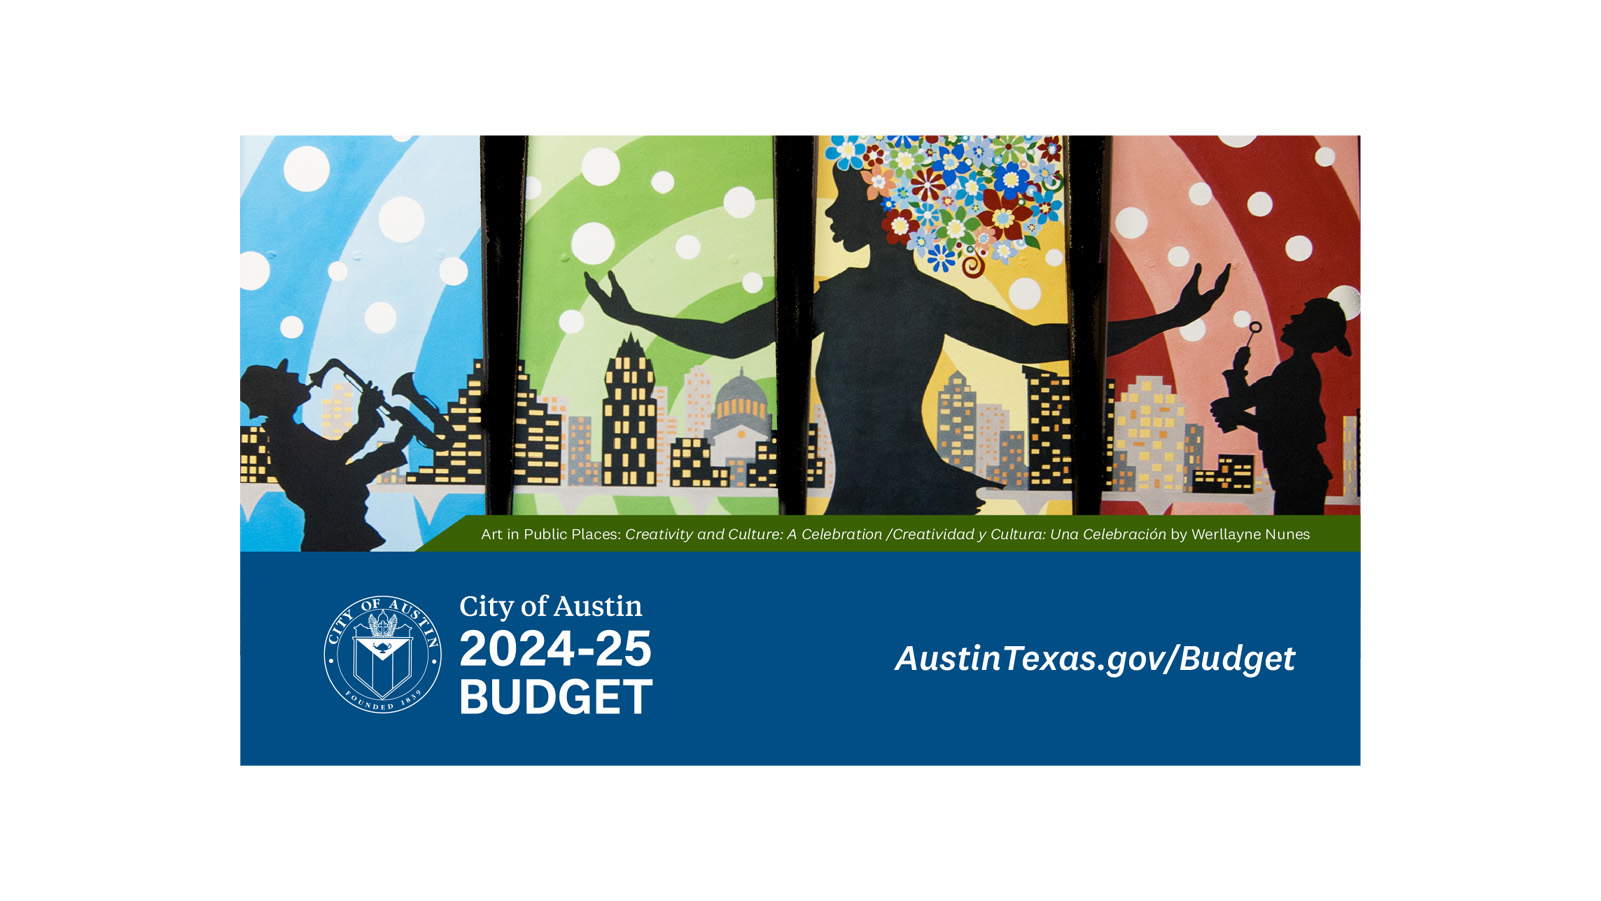 Collage of images showing the budget cover